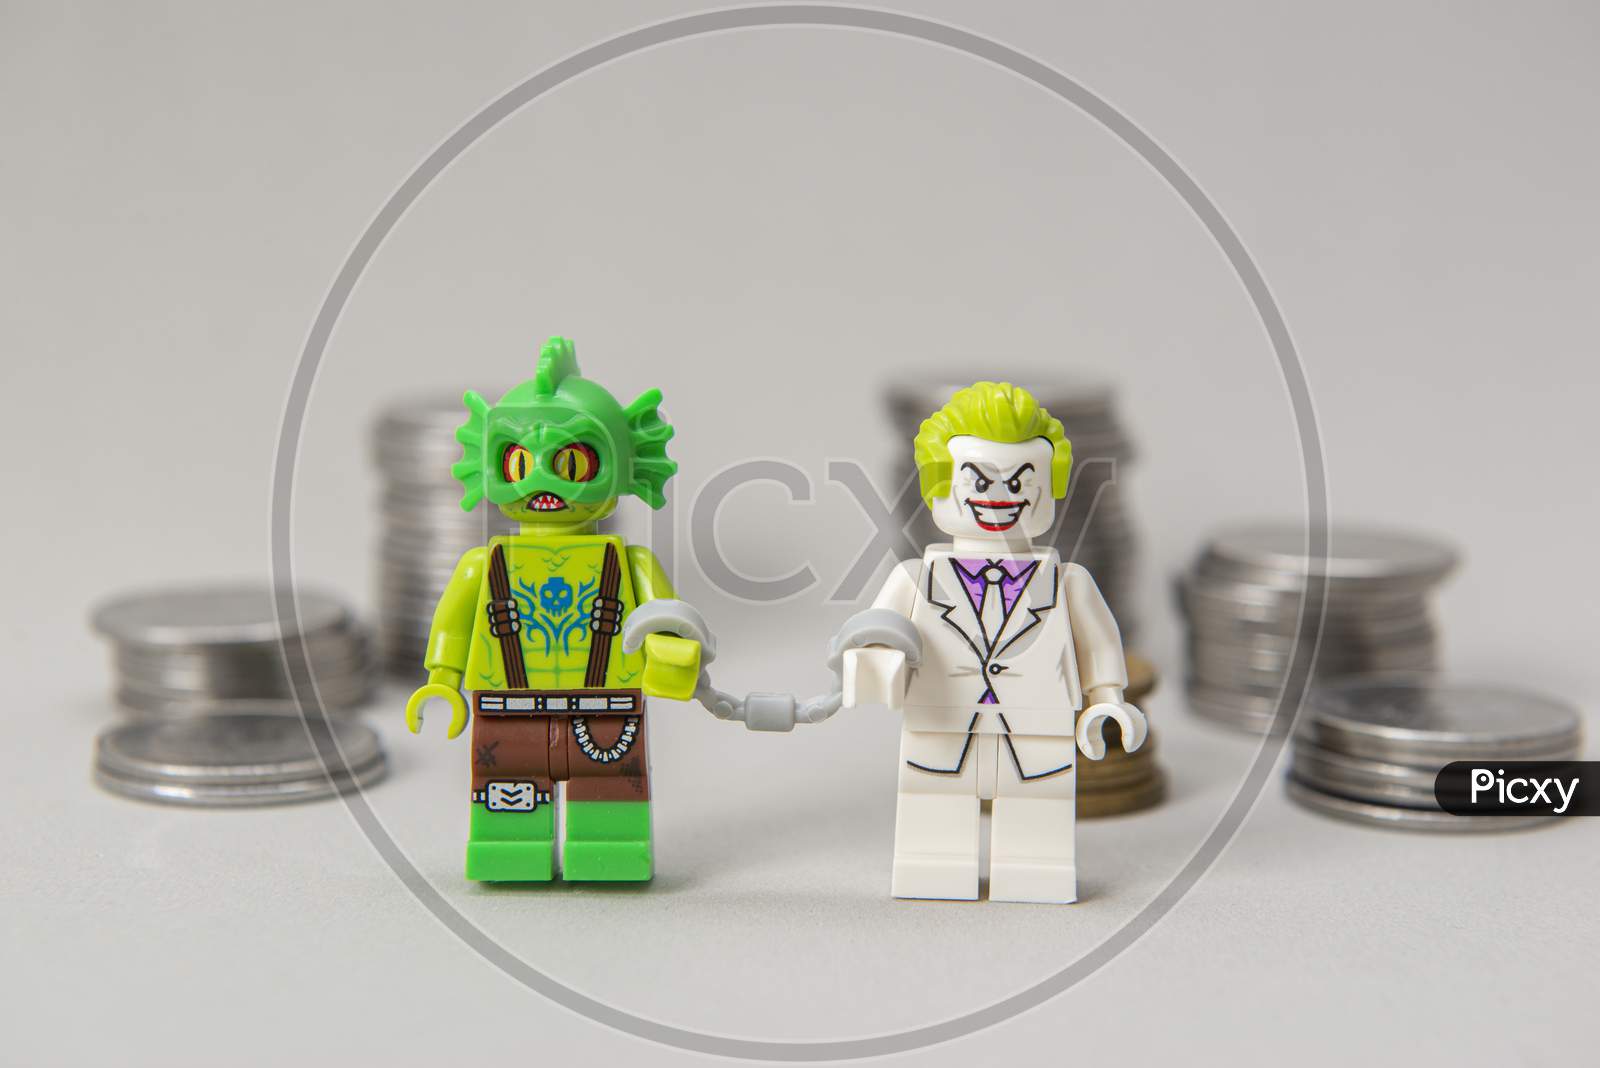 Joker And Monster Minifigure Handcuffed To Each Other With Coins.